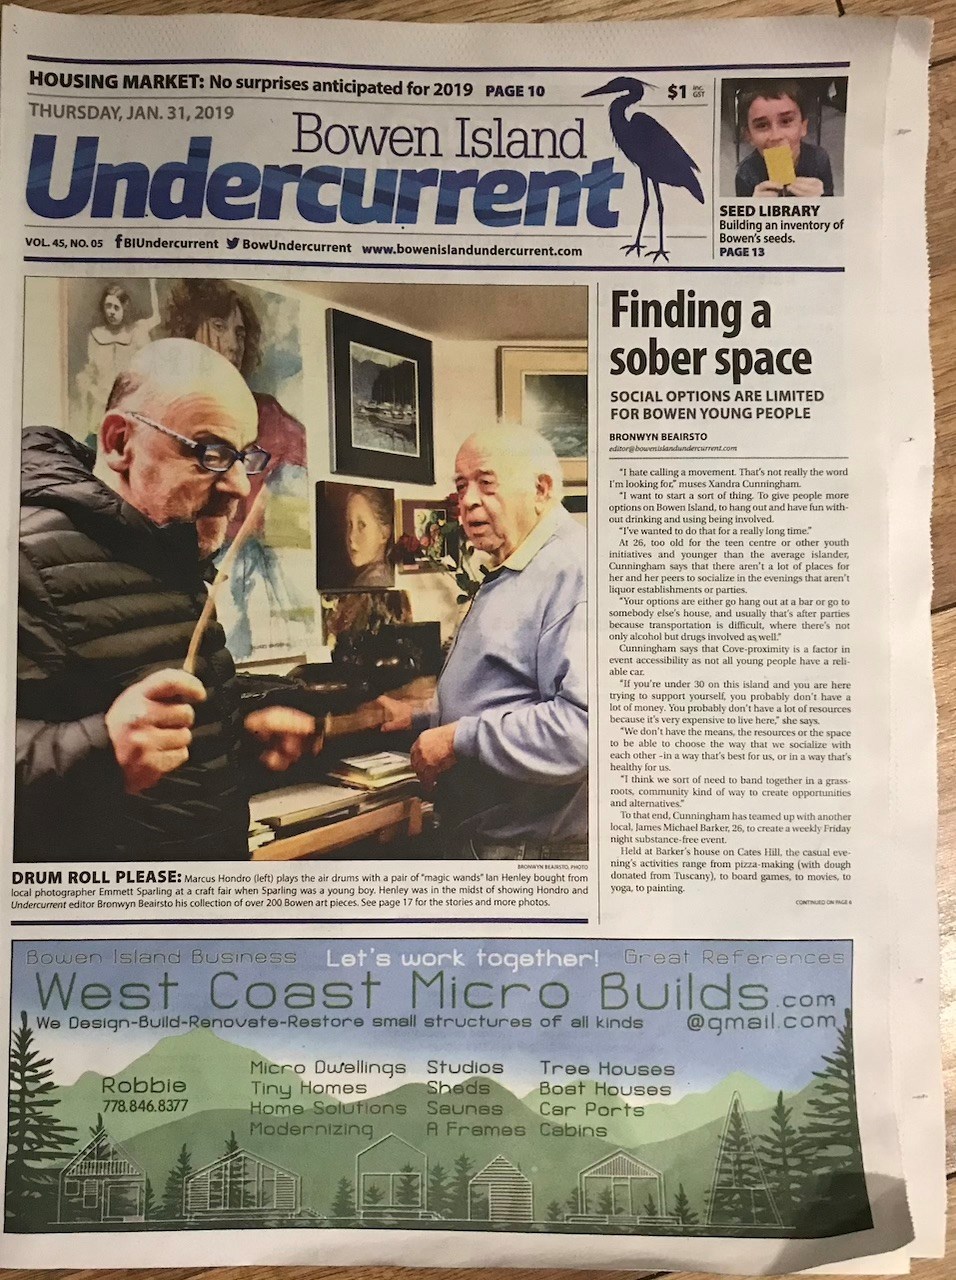 The freshly redesigned January 31, 2019 edition of the Undercurrent.